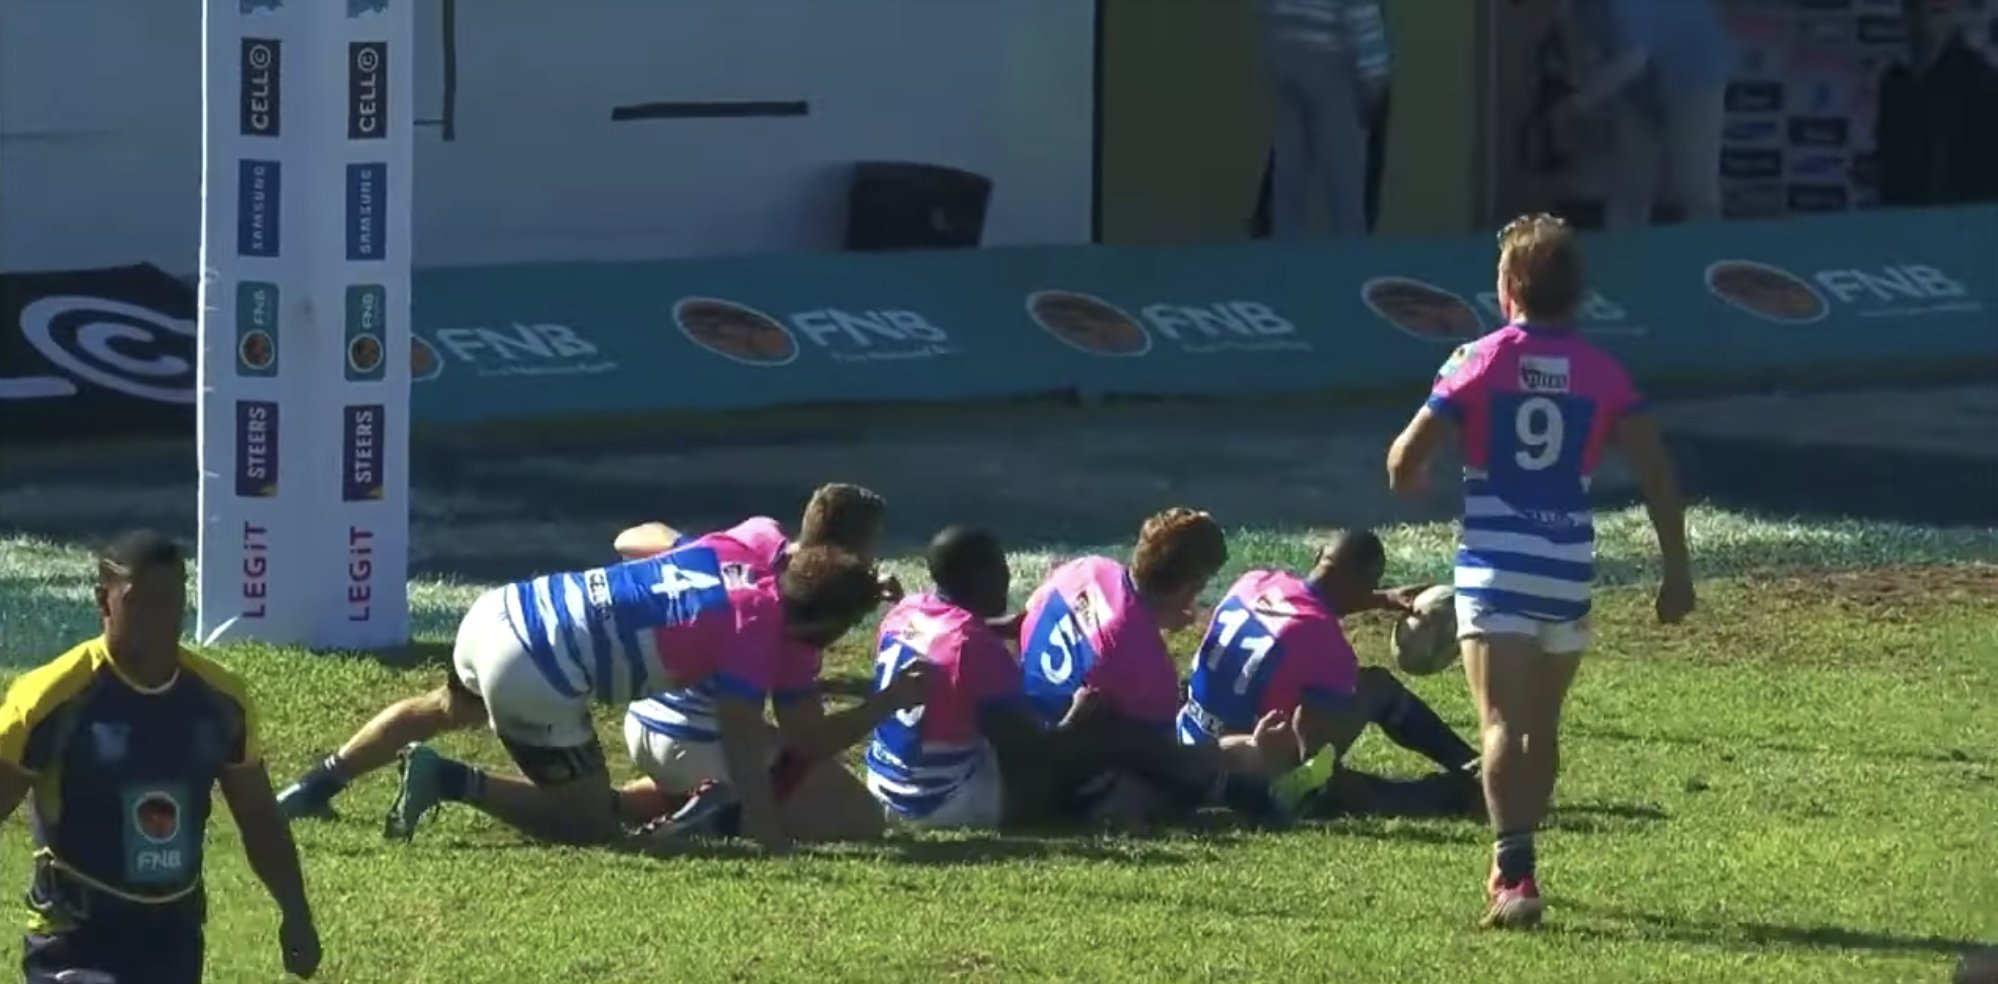 A compilation of some the best celebrations in rugby ever has been created